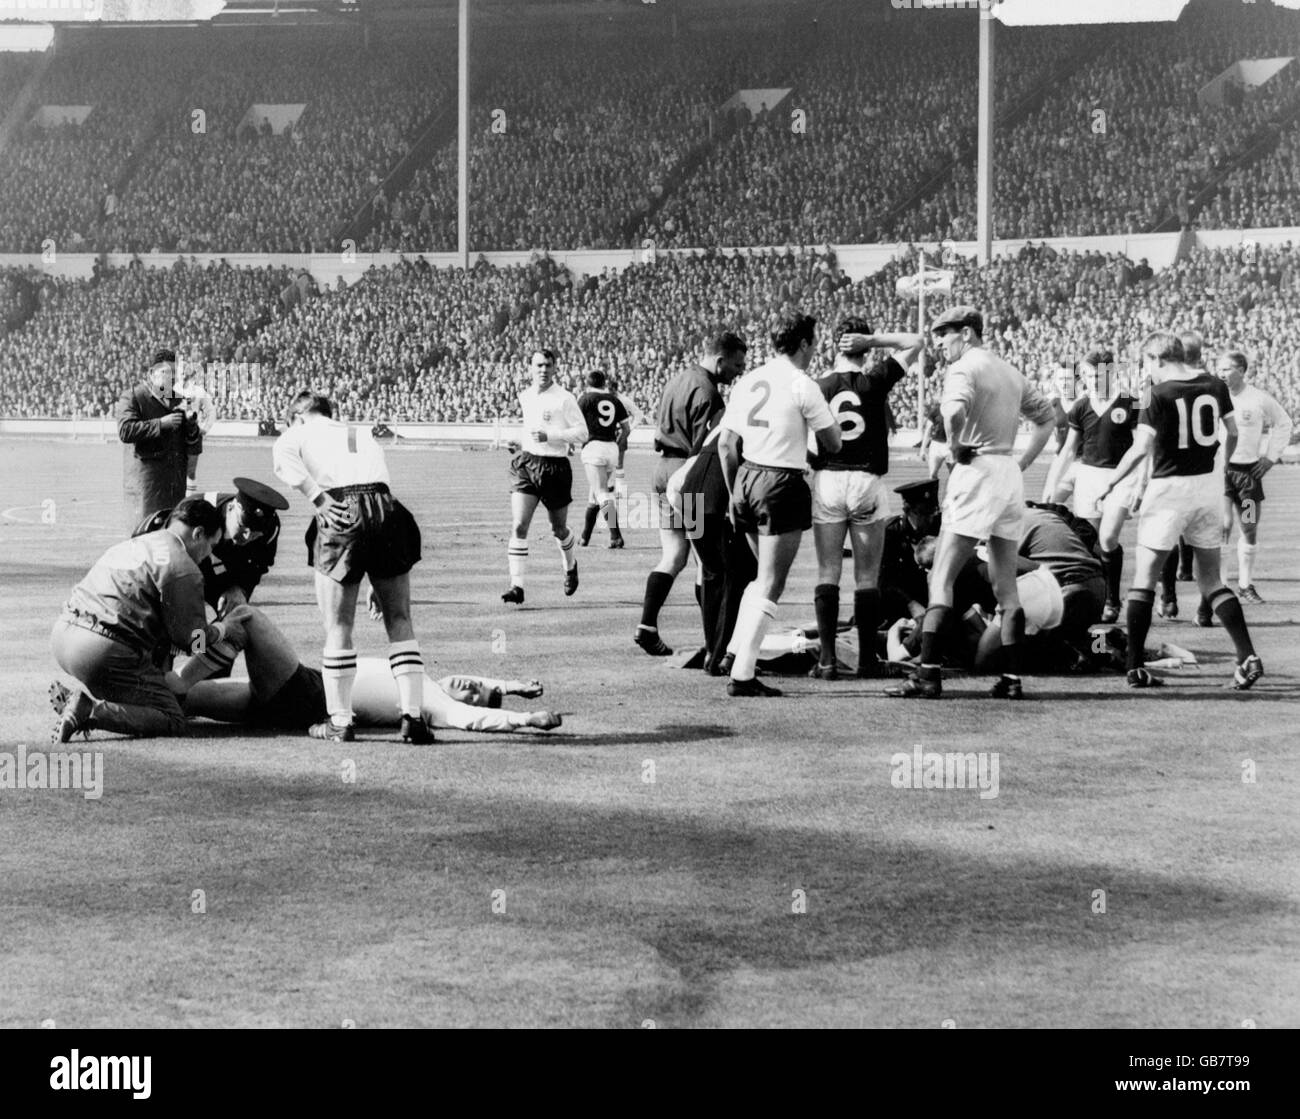 England's Bobby Smith (l, on floor) and Scotland's Eric Caldow (r, on floor) receive attention after colliding. Attending to Smith are England trainer Harold Shepherdson (l) and England's Bryan Douglas (7), while among those gathered around Caldow are (l-r) England's Bobby Charlton, Scotland's Denis Law, John White, Dave Mackay, Bill Brown and Jim Baxter, and England's Jimmy Armfield (2). England's Jimmy Greaves (c) is trotting over to check on his mate Smith Stock Photo